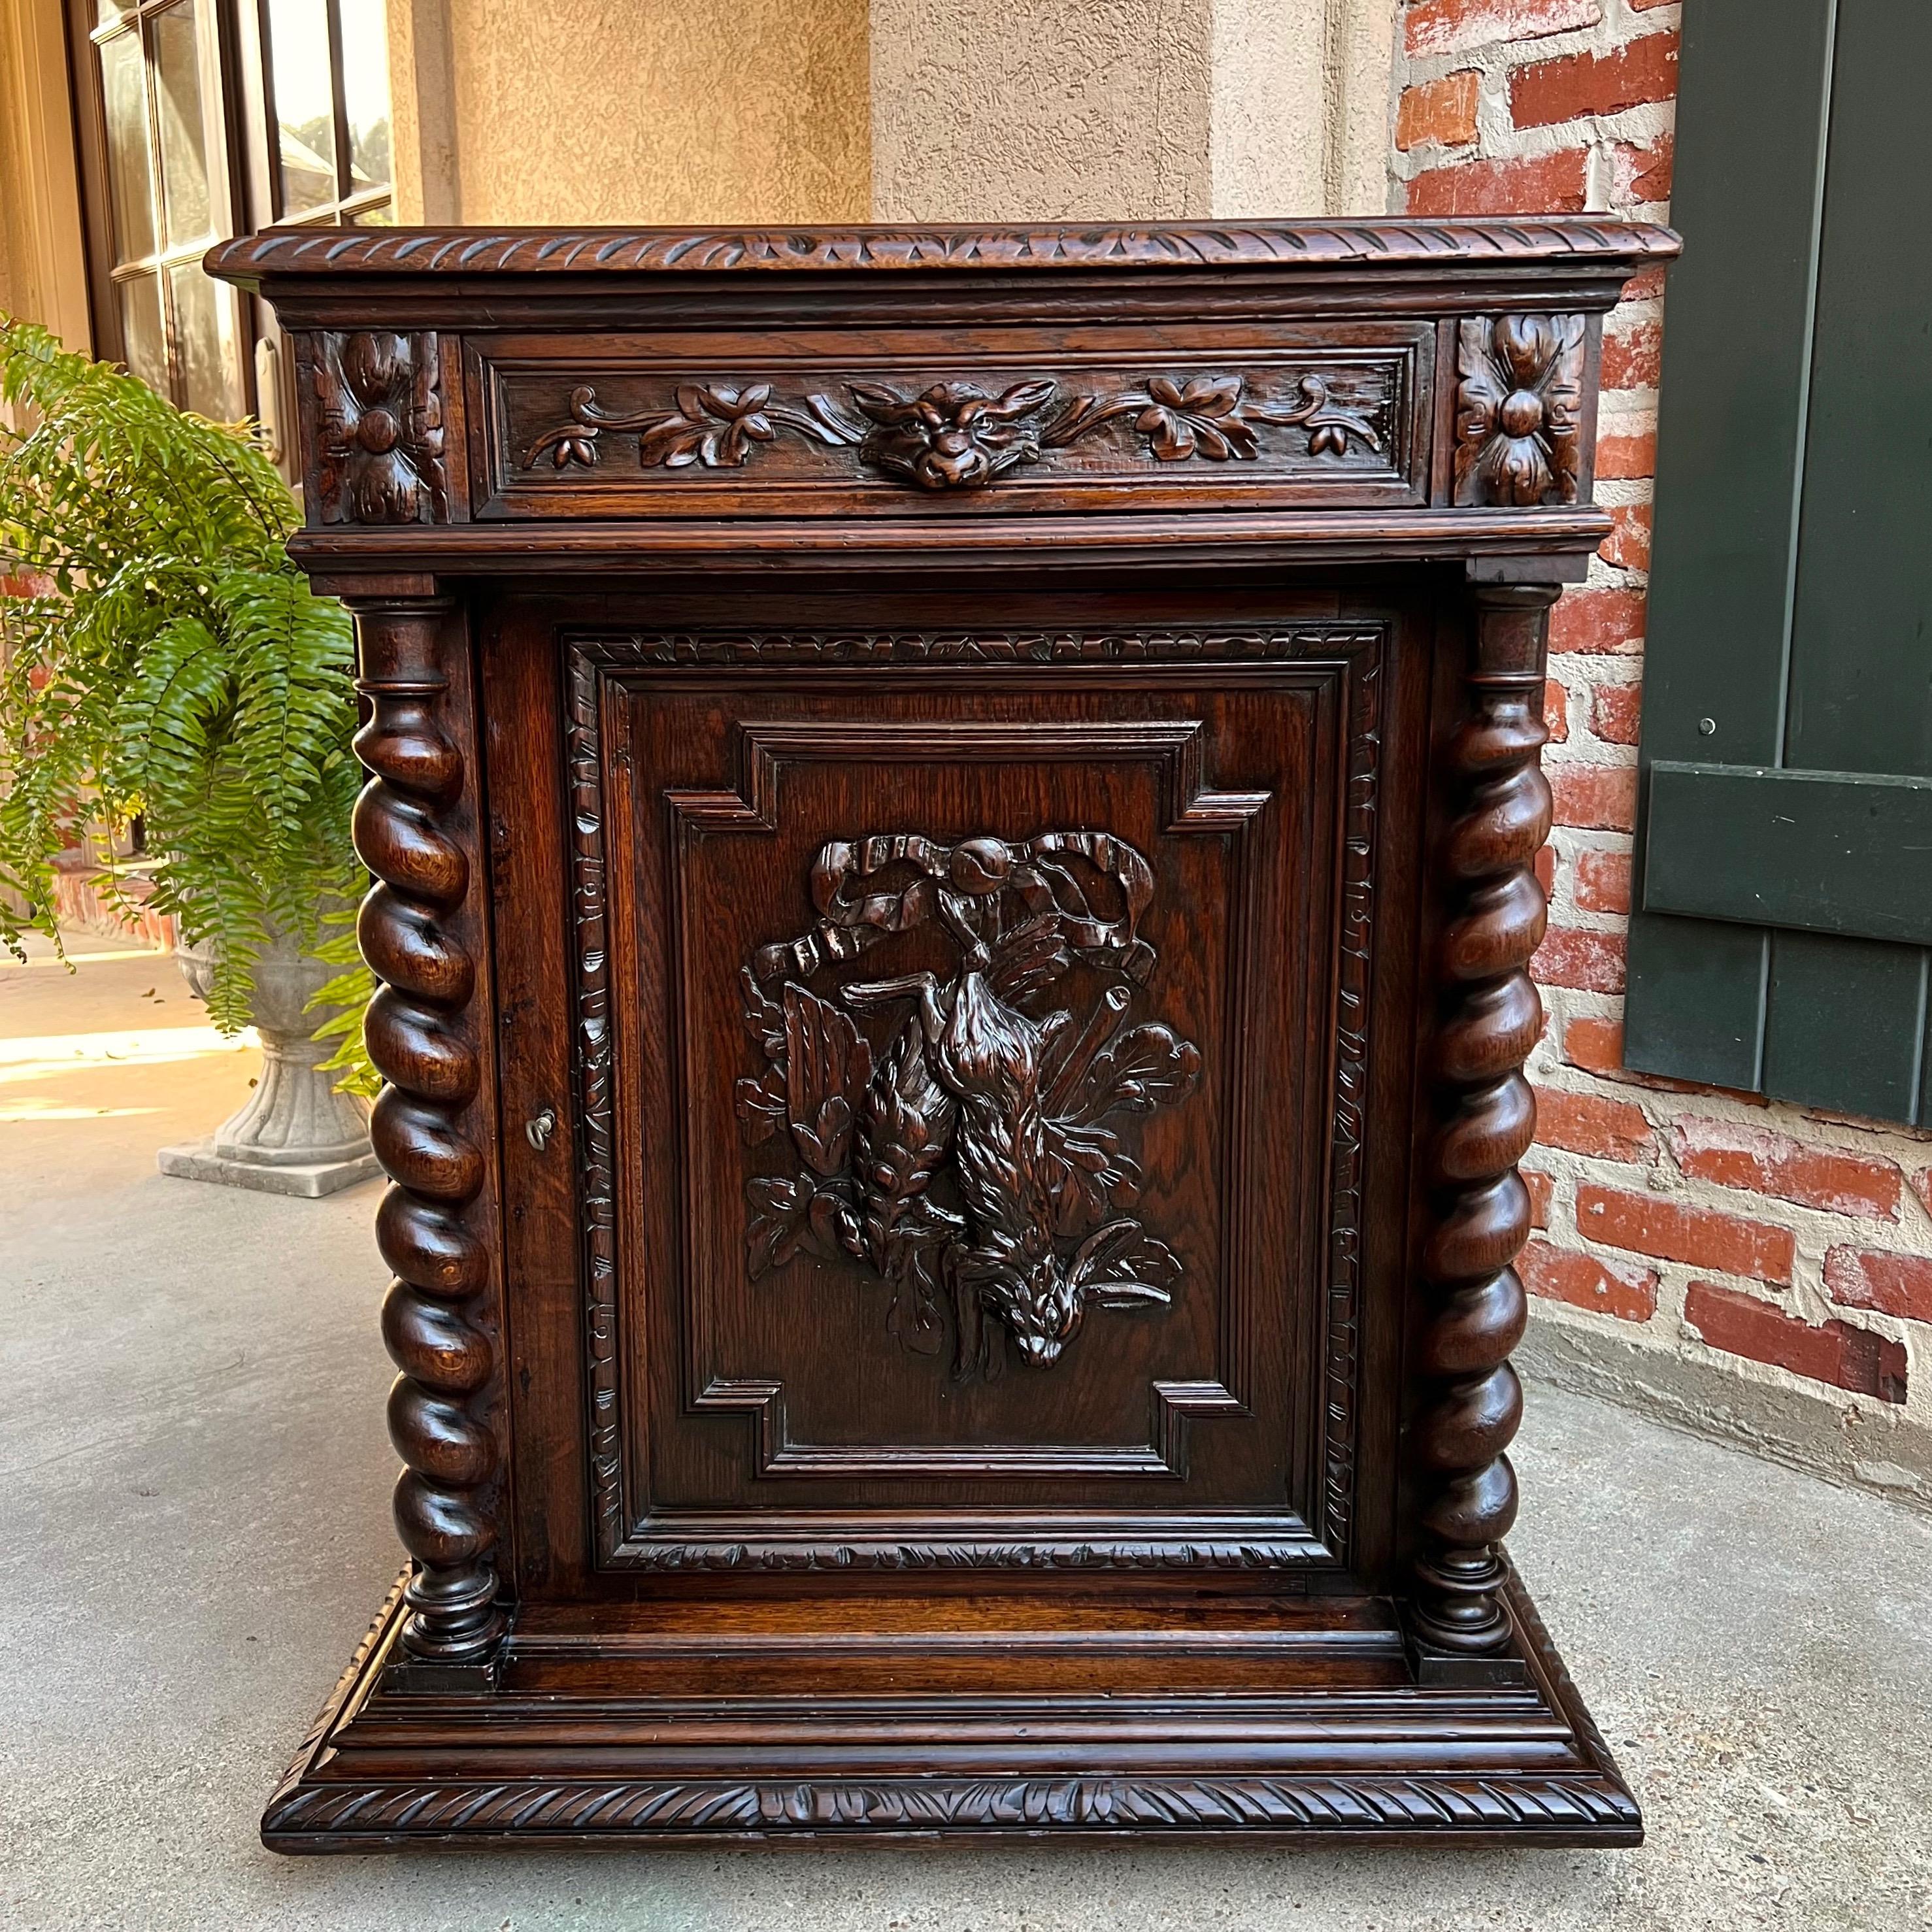 19th century French Carved Oak Hunt Cabinet Confiturier Barley Twist Rabbit.

Directly imported from France, a beautifully hand carved 19th century French confiturier cabinet, in a versatile size, perfect for placement in any room and a customer